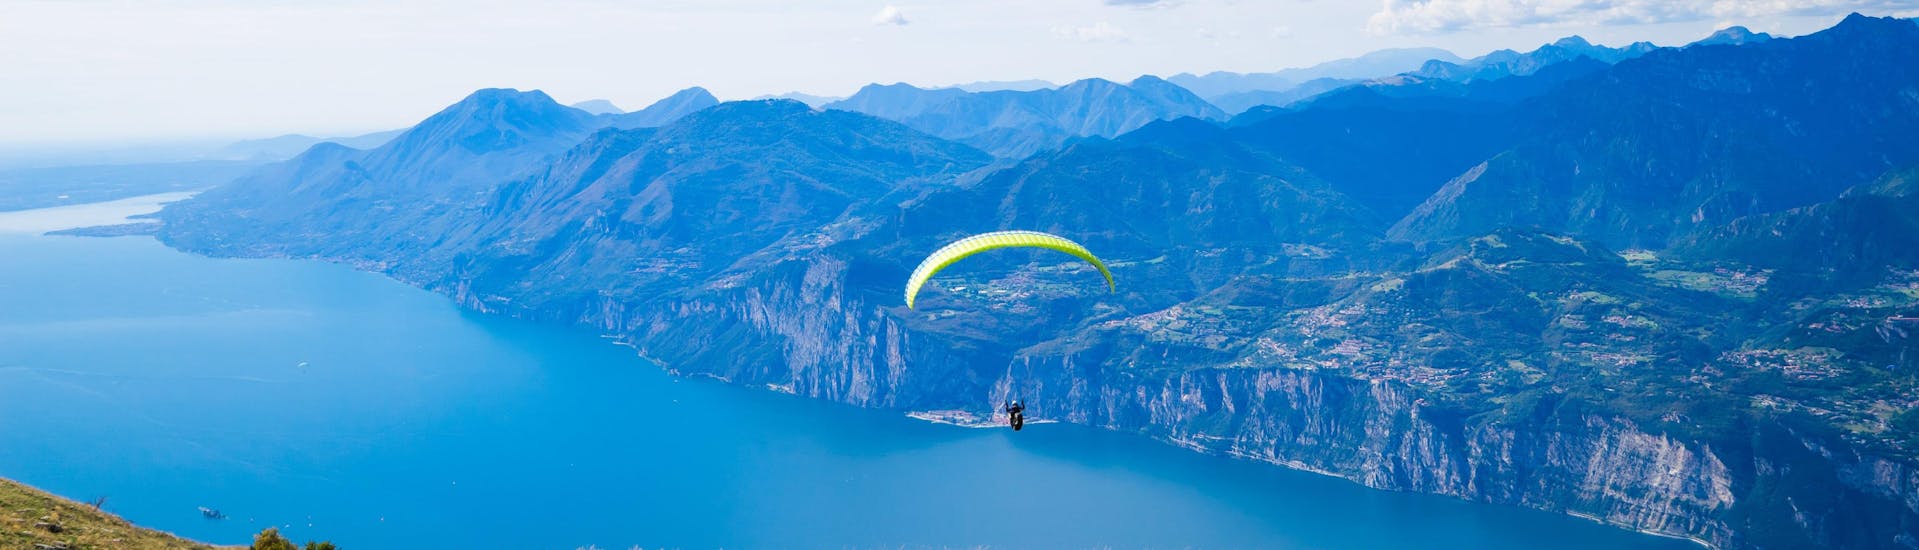 A lone paraglider can be seen floating gently over the picturesque landscape while paragliding at Lake Garda.